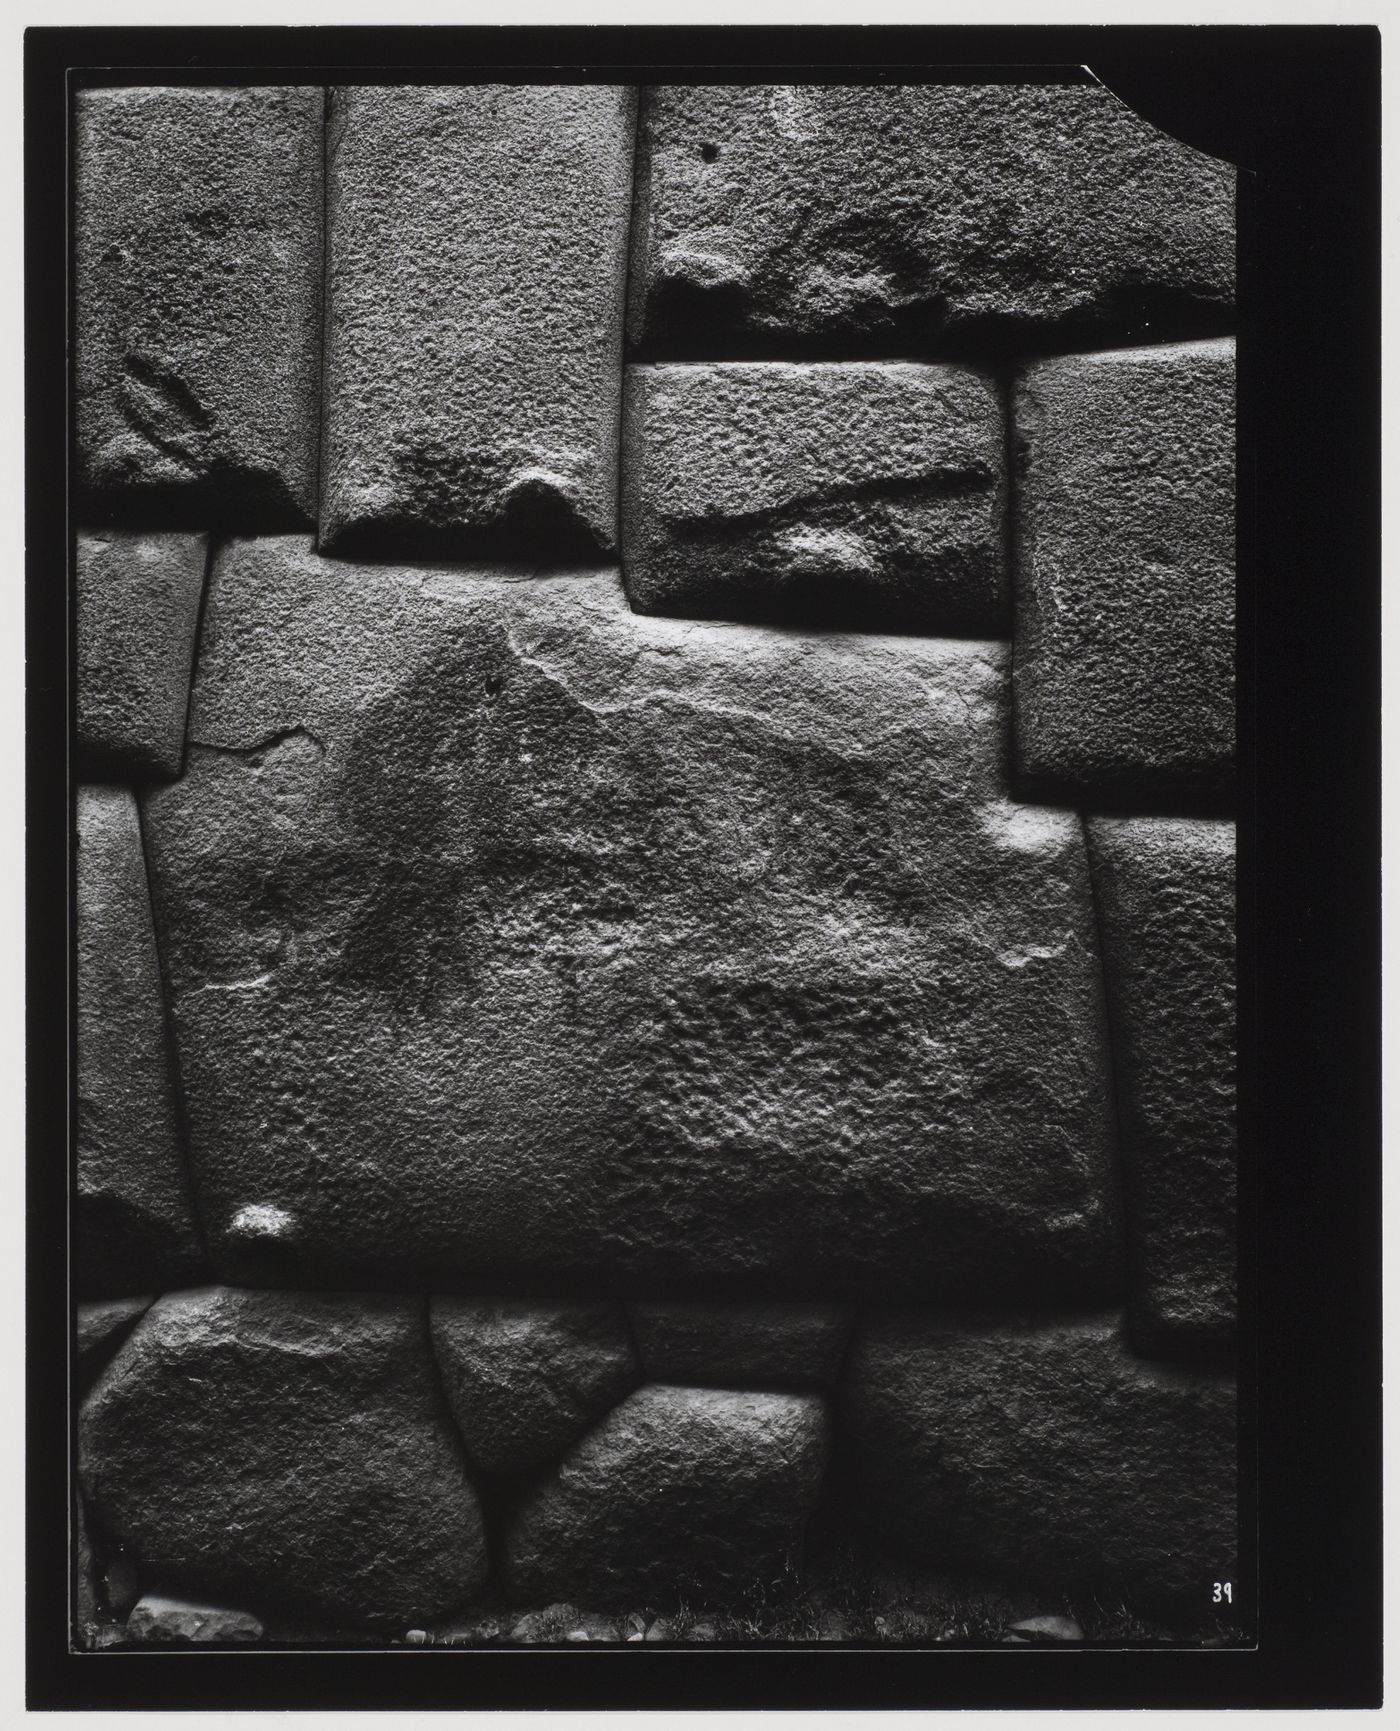 Close-up view of the Twelve Cornered Stone (also known as the Stone of Twelve Angles), the Palace of Inca Sinchi Roca, Hatunrumiyoc Street, Cuzco, Peru